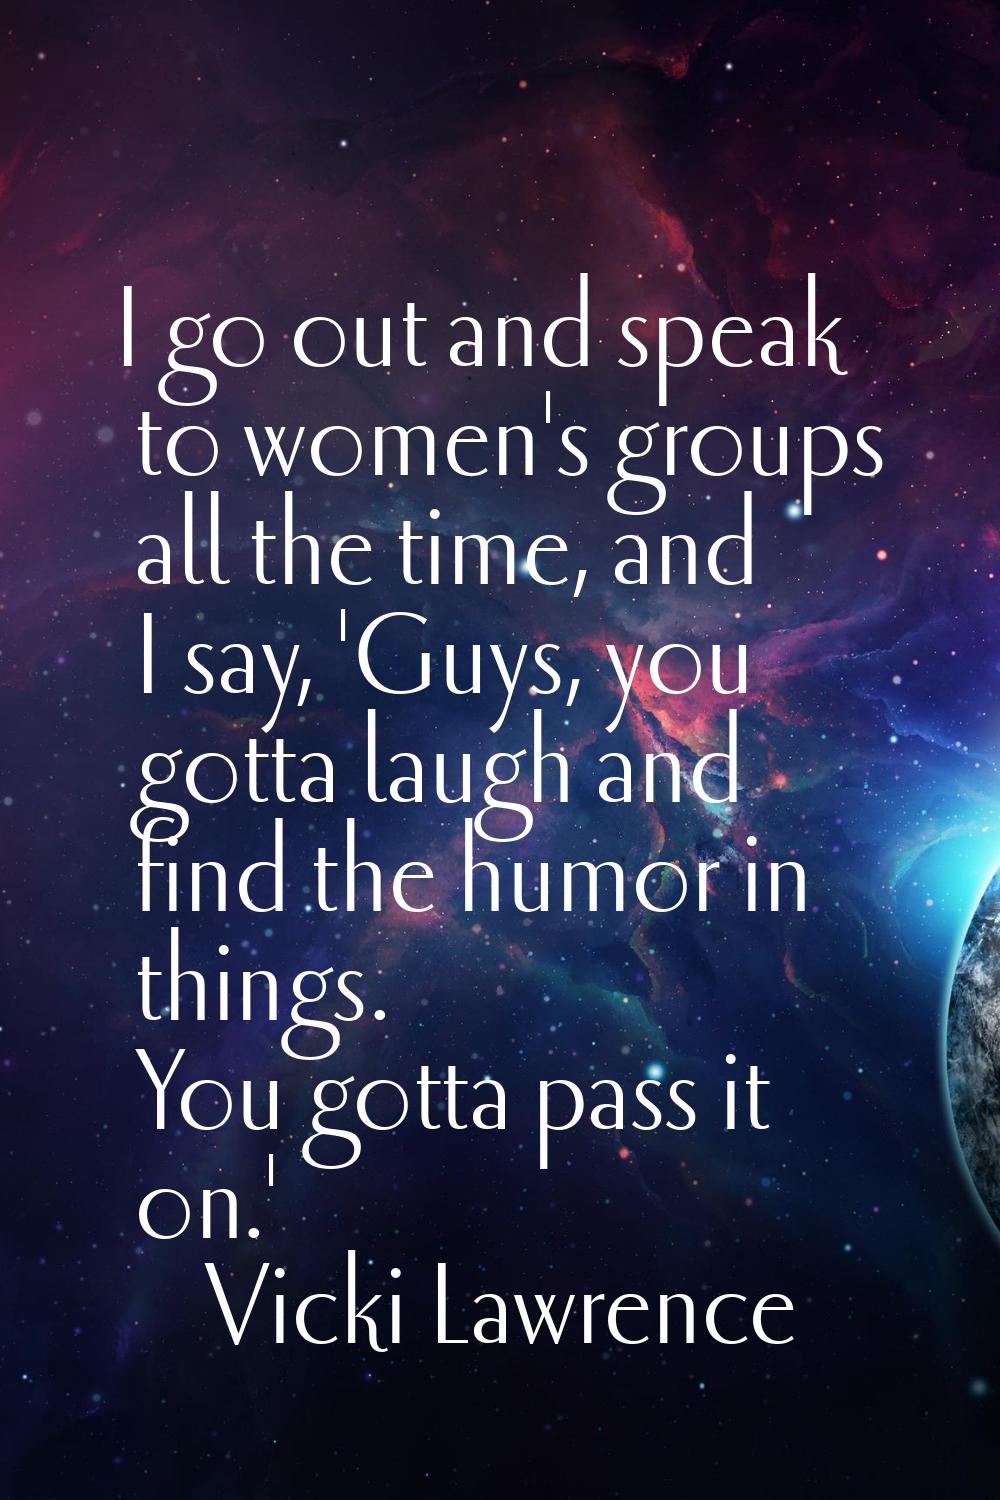 I go out and speak to women's groups all the time, and I say, 'Guys, you gotta laugh and find the h